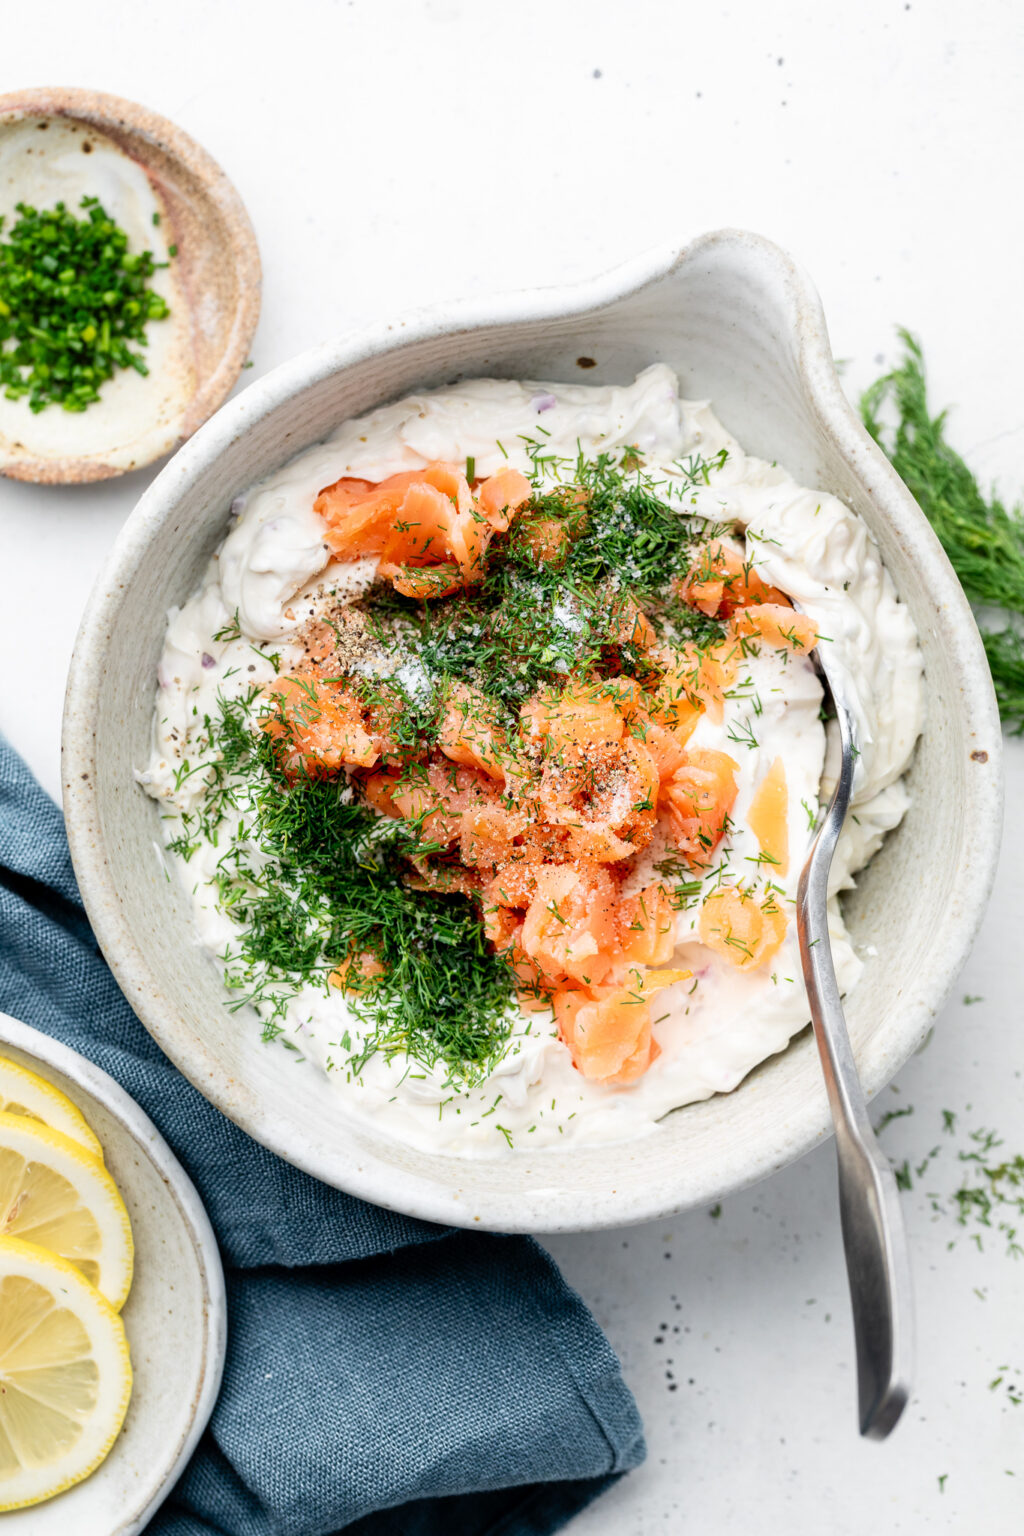 The Best Smoked Salmon Dip - All the Healthy Things